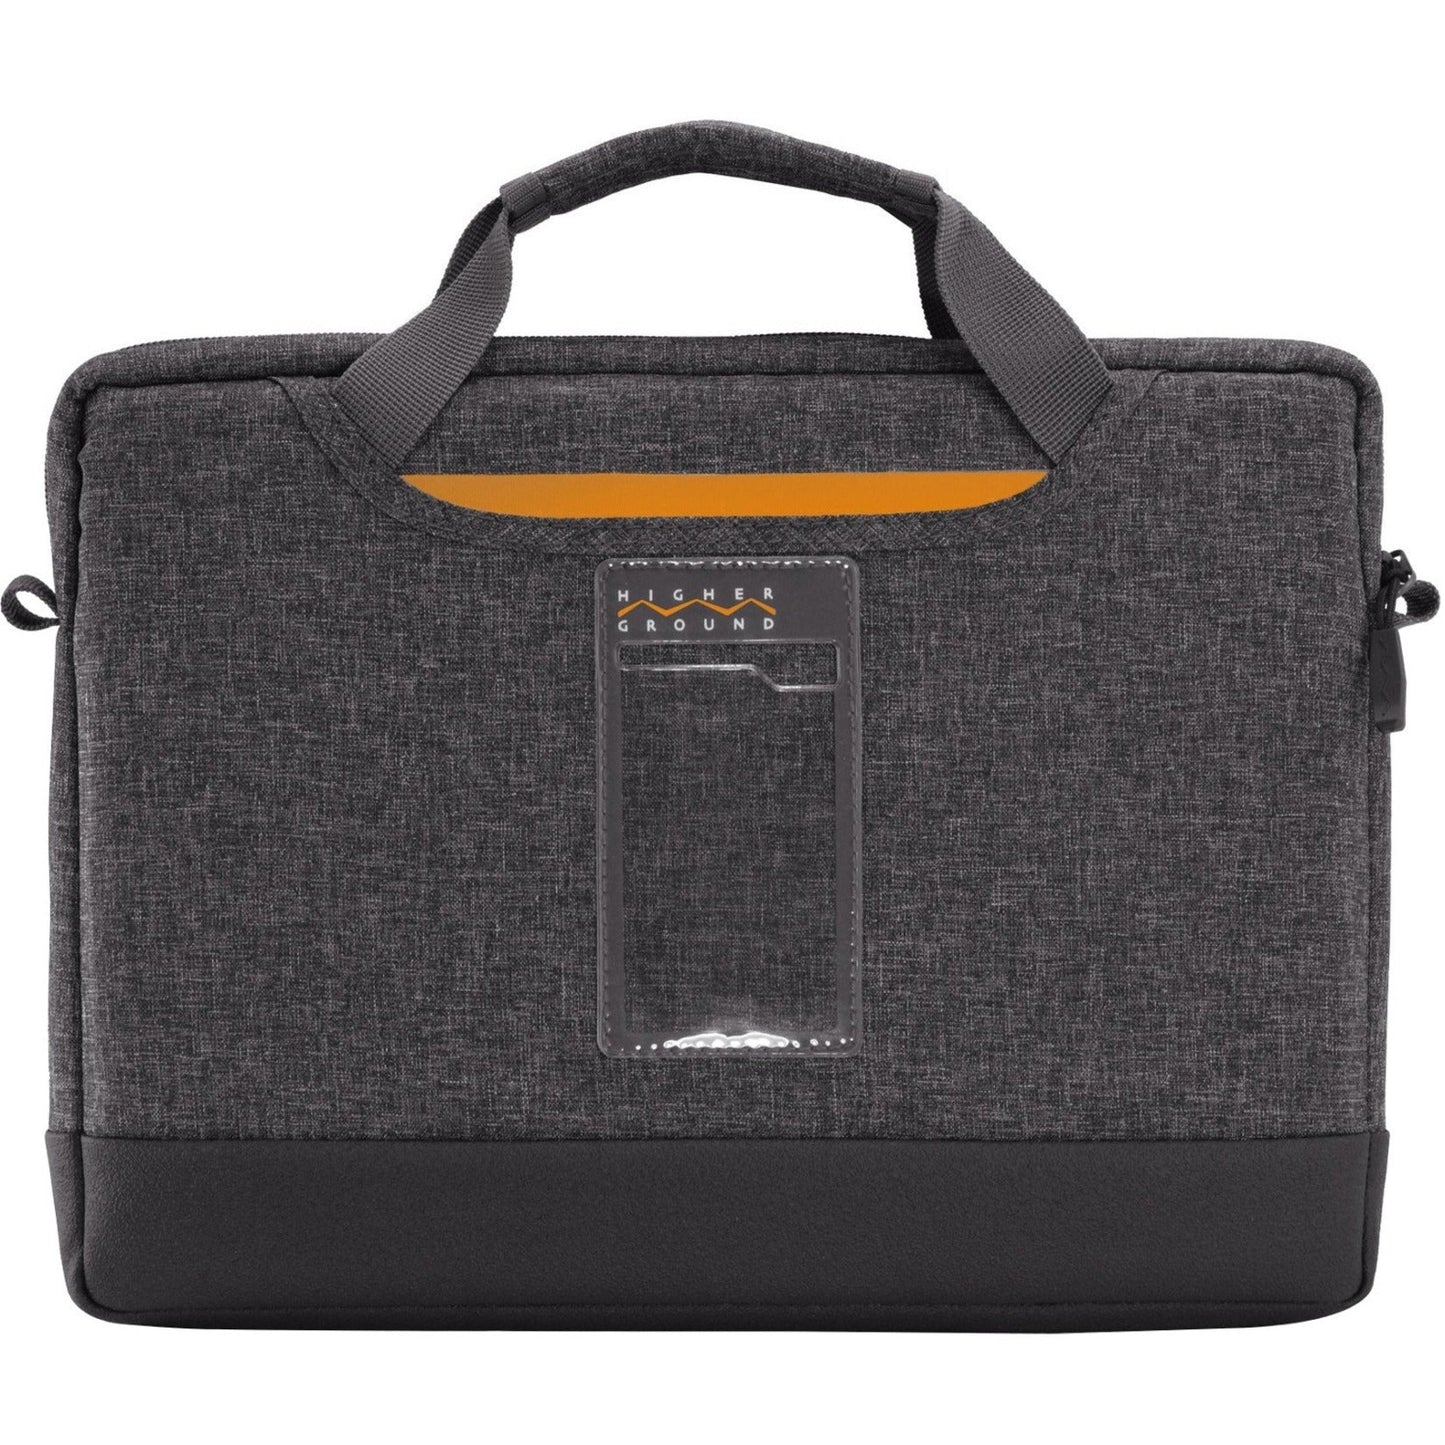 Higher Ground Flak Jacket Plus 3.0 Carrying Case for 15" Apple Macbook Microsoft Surface Pro Chromebook - Gray